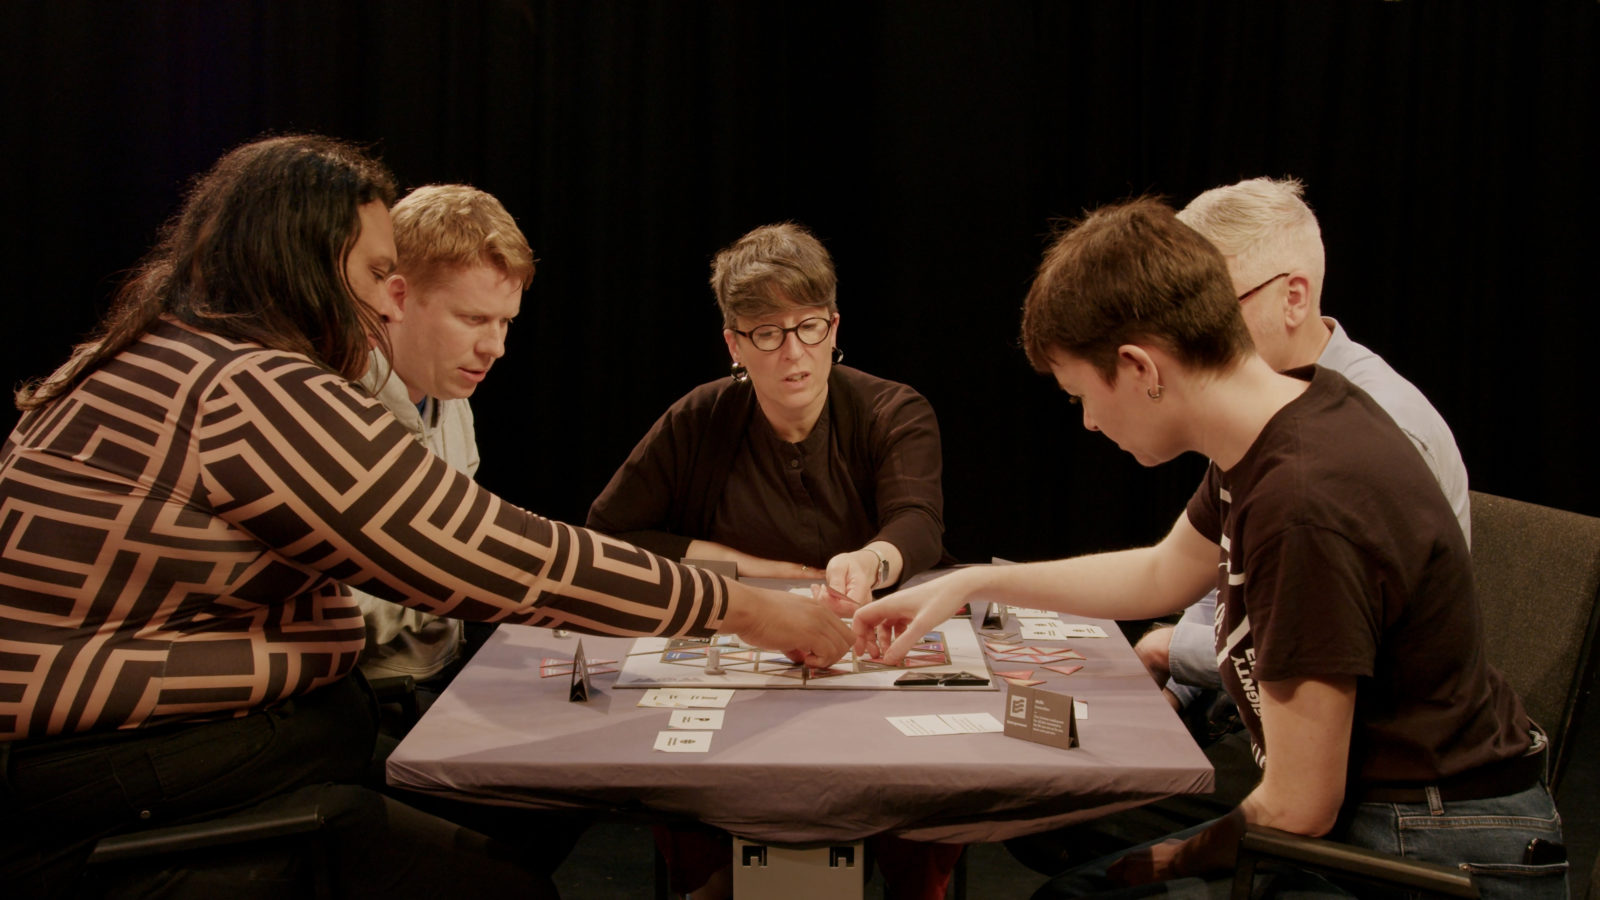 5 people are photographed around the table playing the board game. 3 people reach for things on the board and all of them are looking thoughtful.